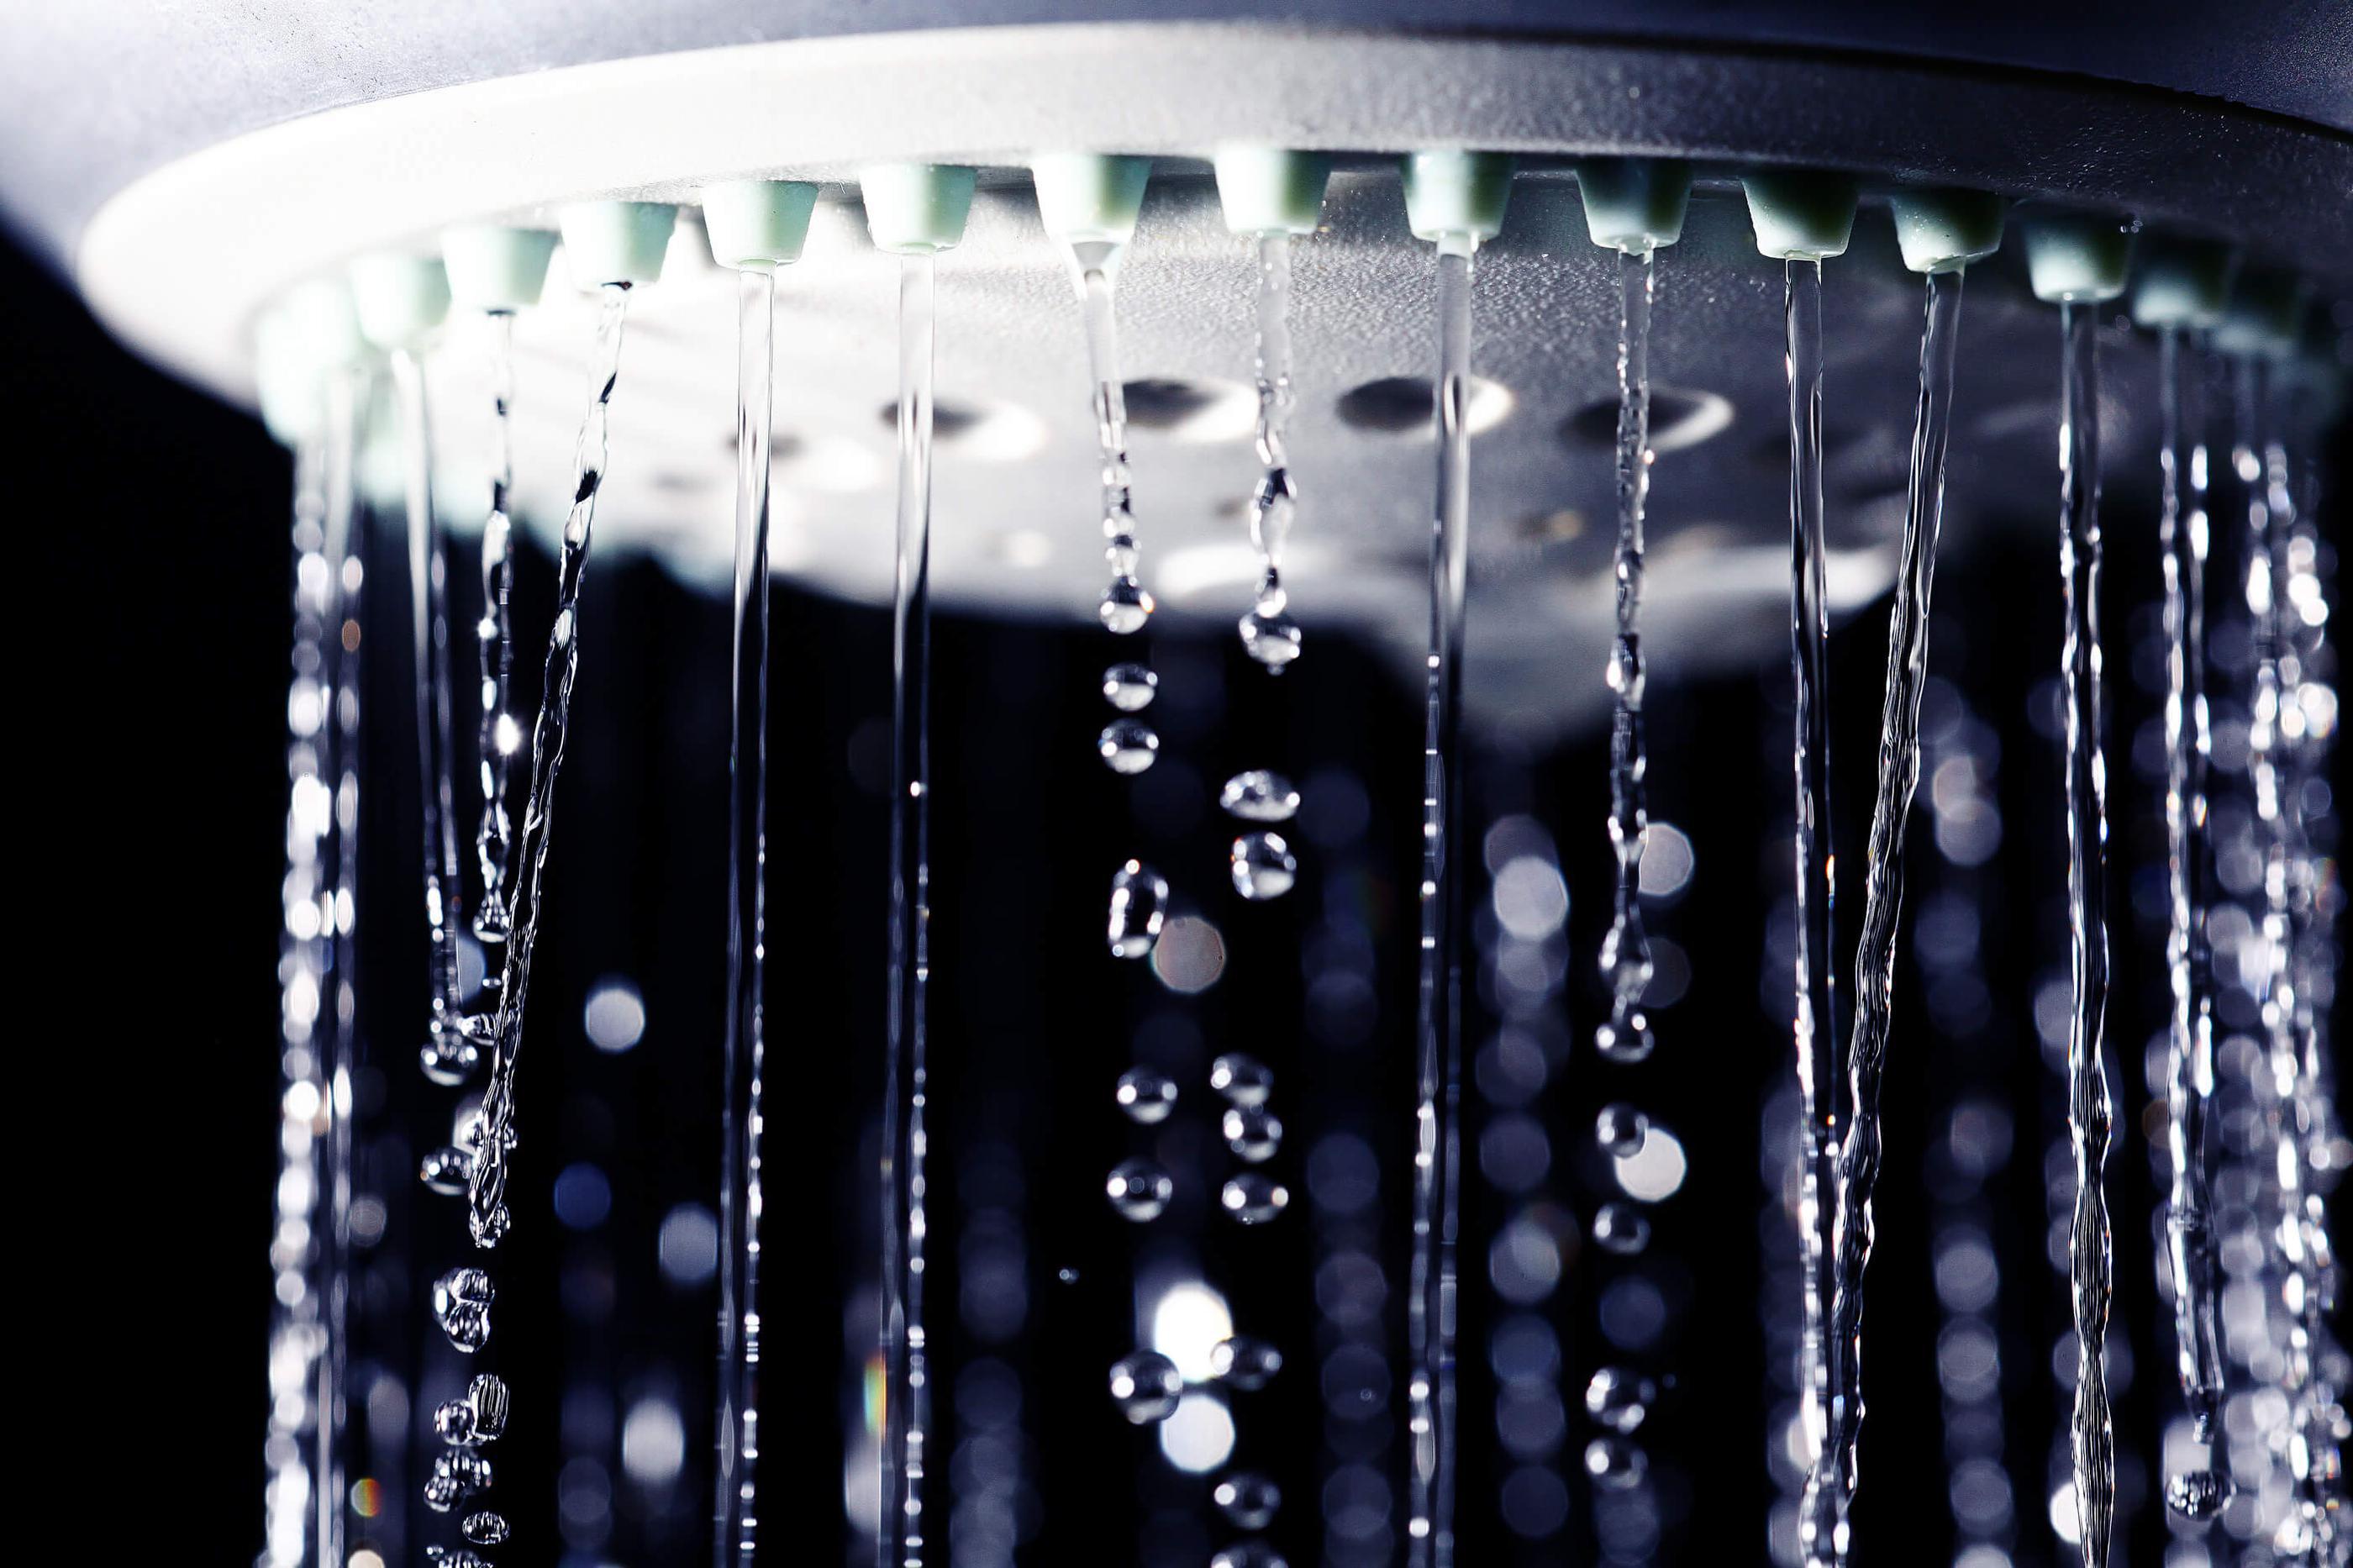 6 Steps to Fix a Leaking Shower Head